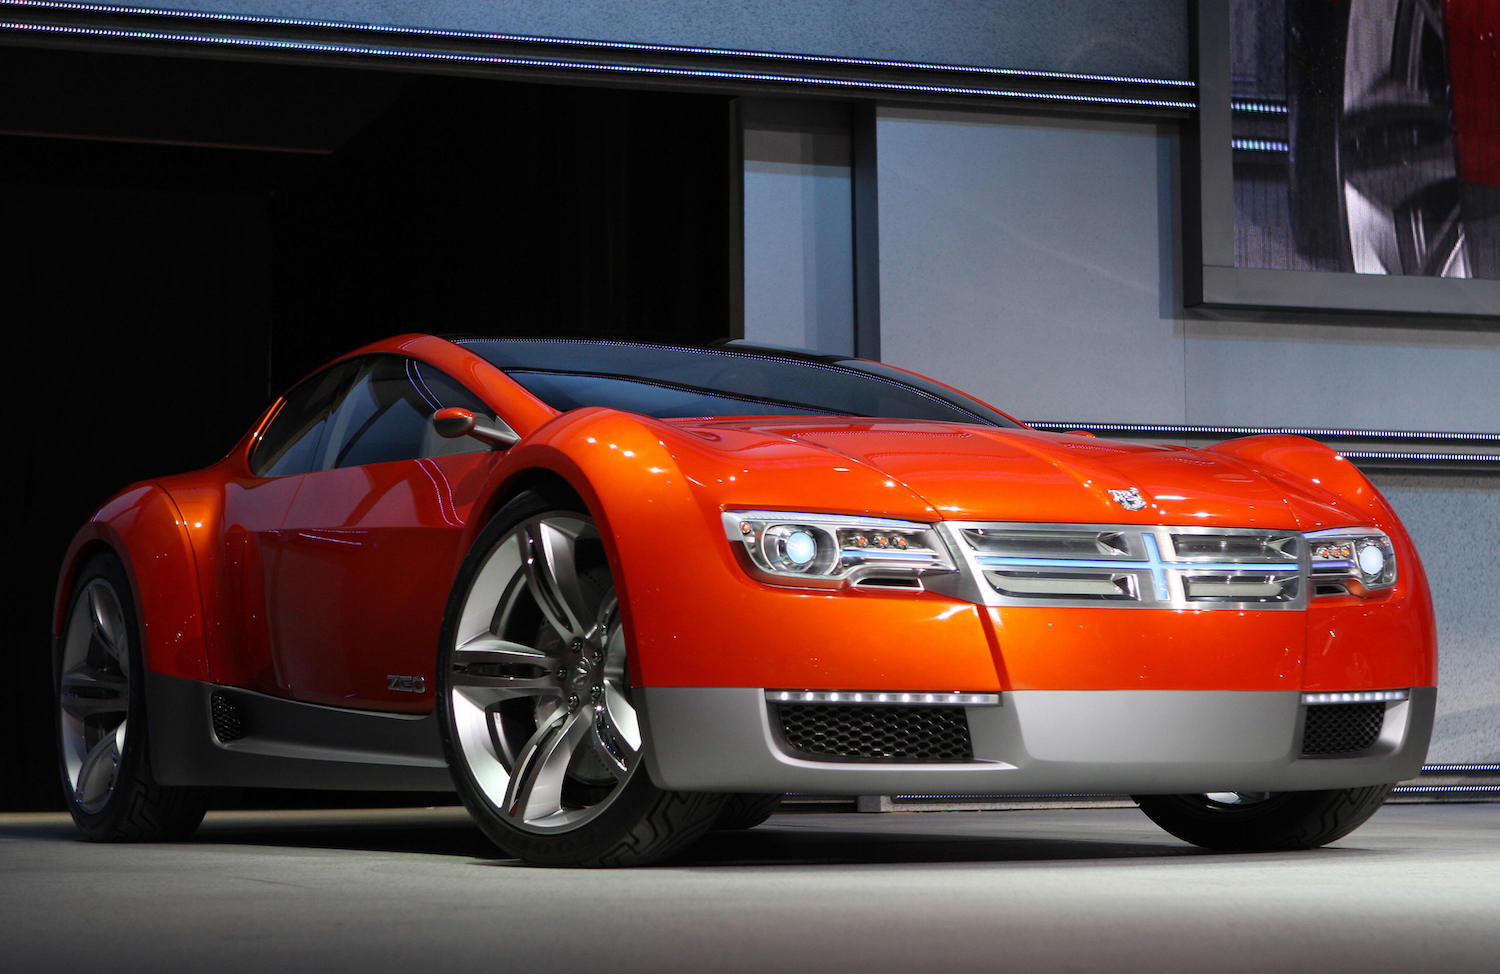 This 2008 Dodge Zeo electric concept car may be a preview of Dodge's eMuscle supercar | STAN HONDA/AFP via Getty Images